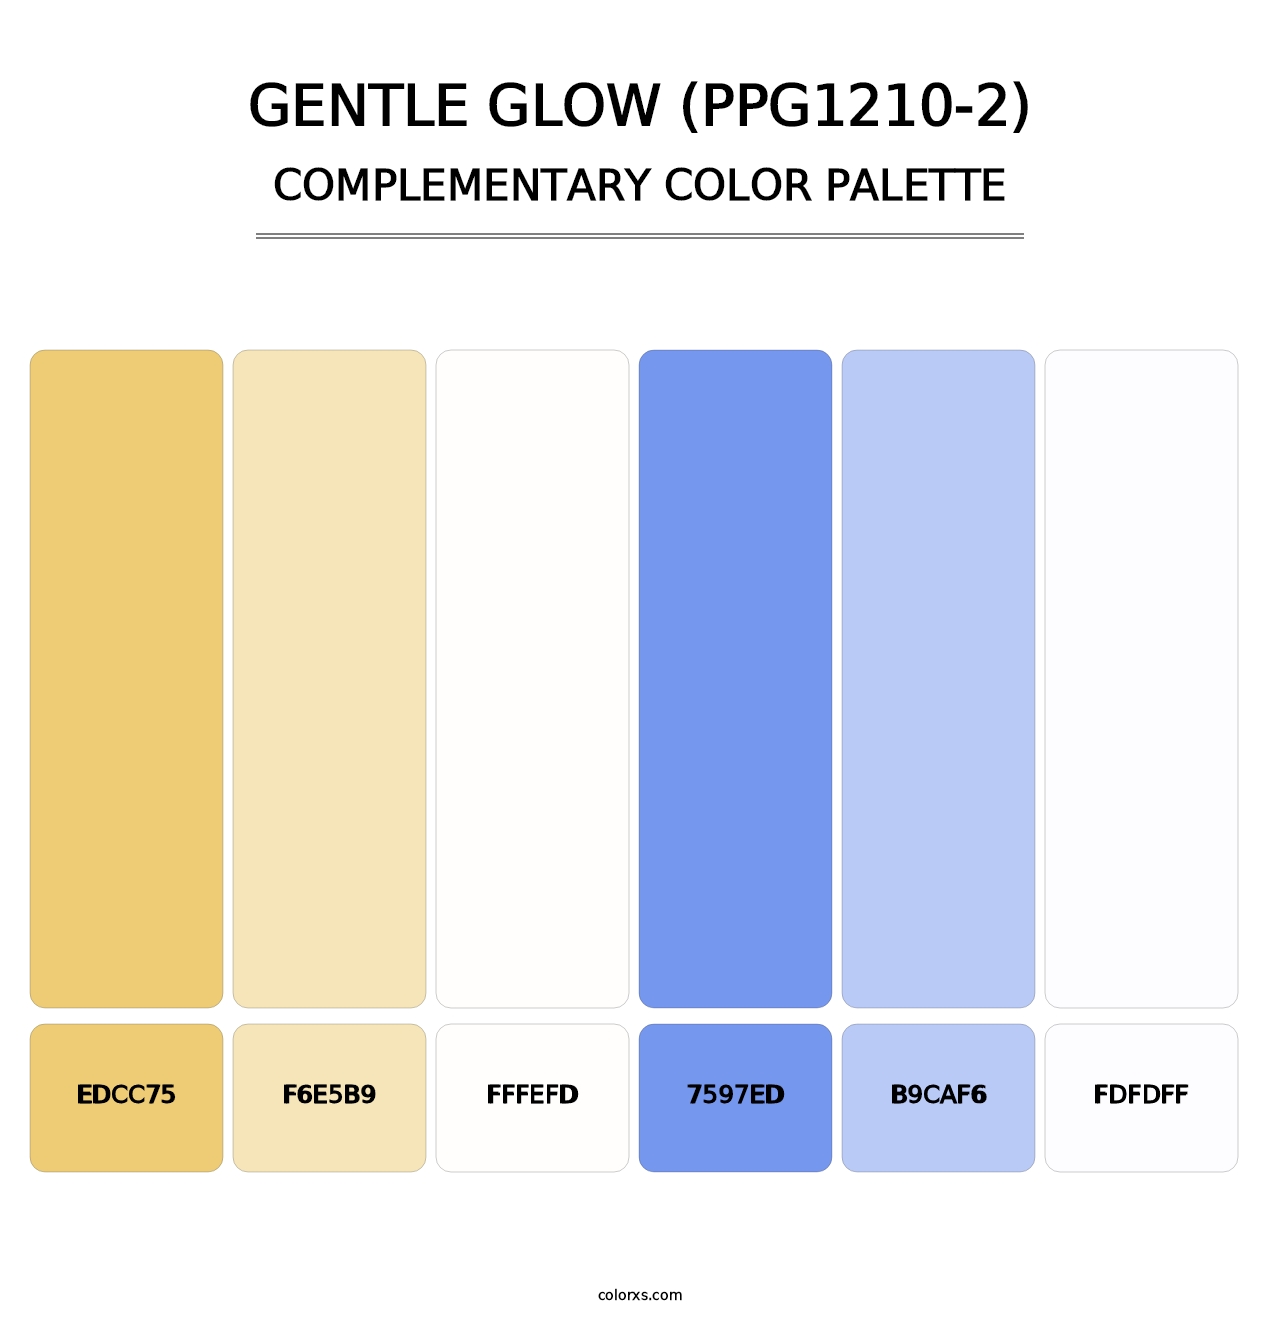 Gentle Glow (PPG1210-2) - Complementary Color Palette